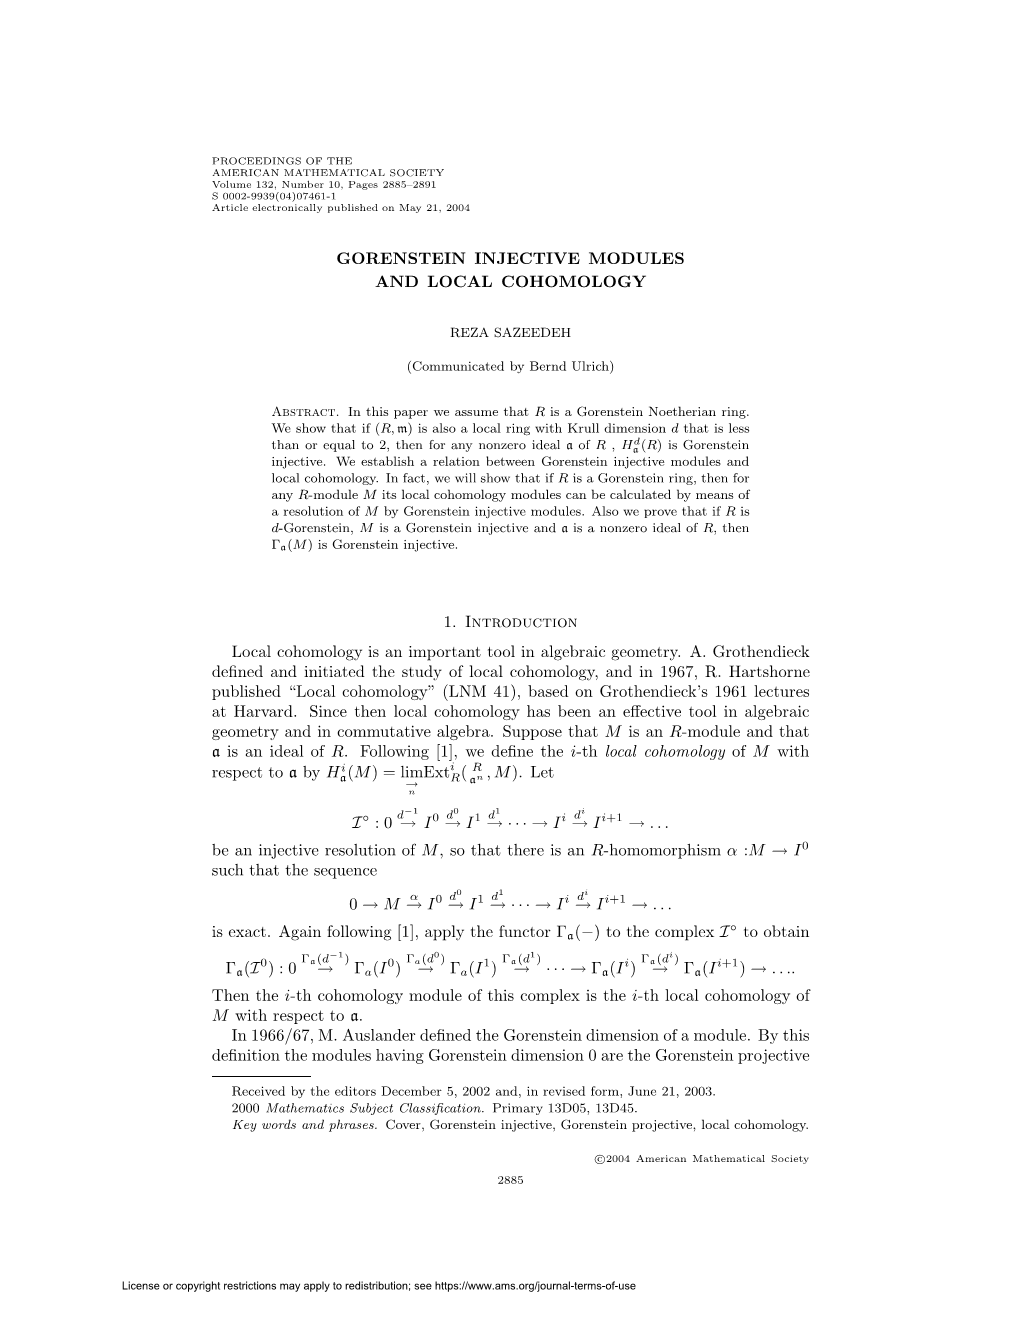 Gorenstein Injective Modules and Local Cohomology 1